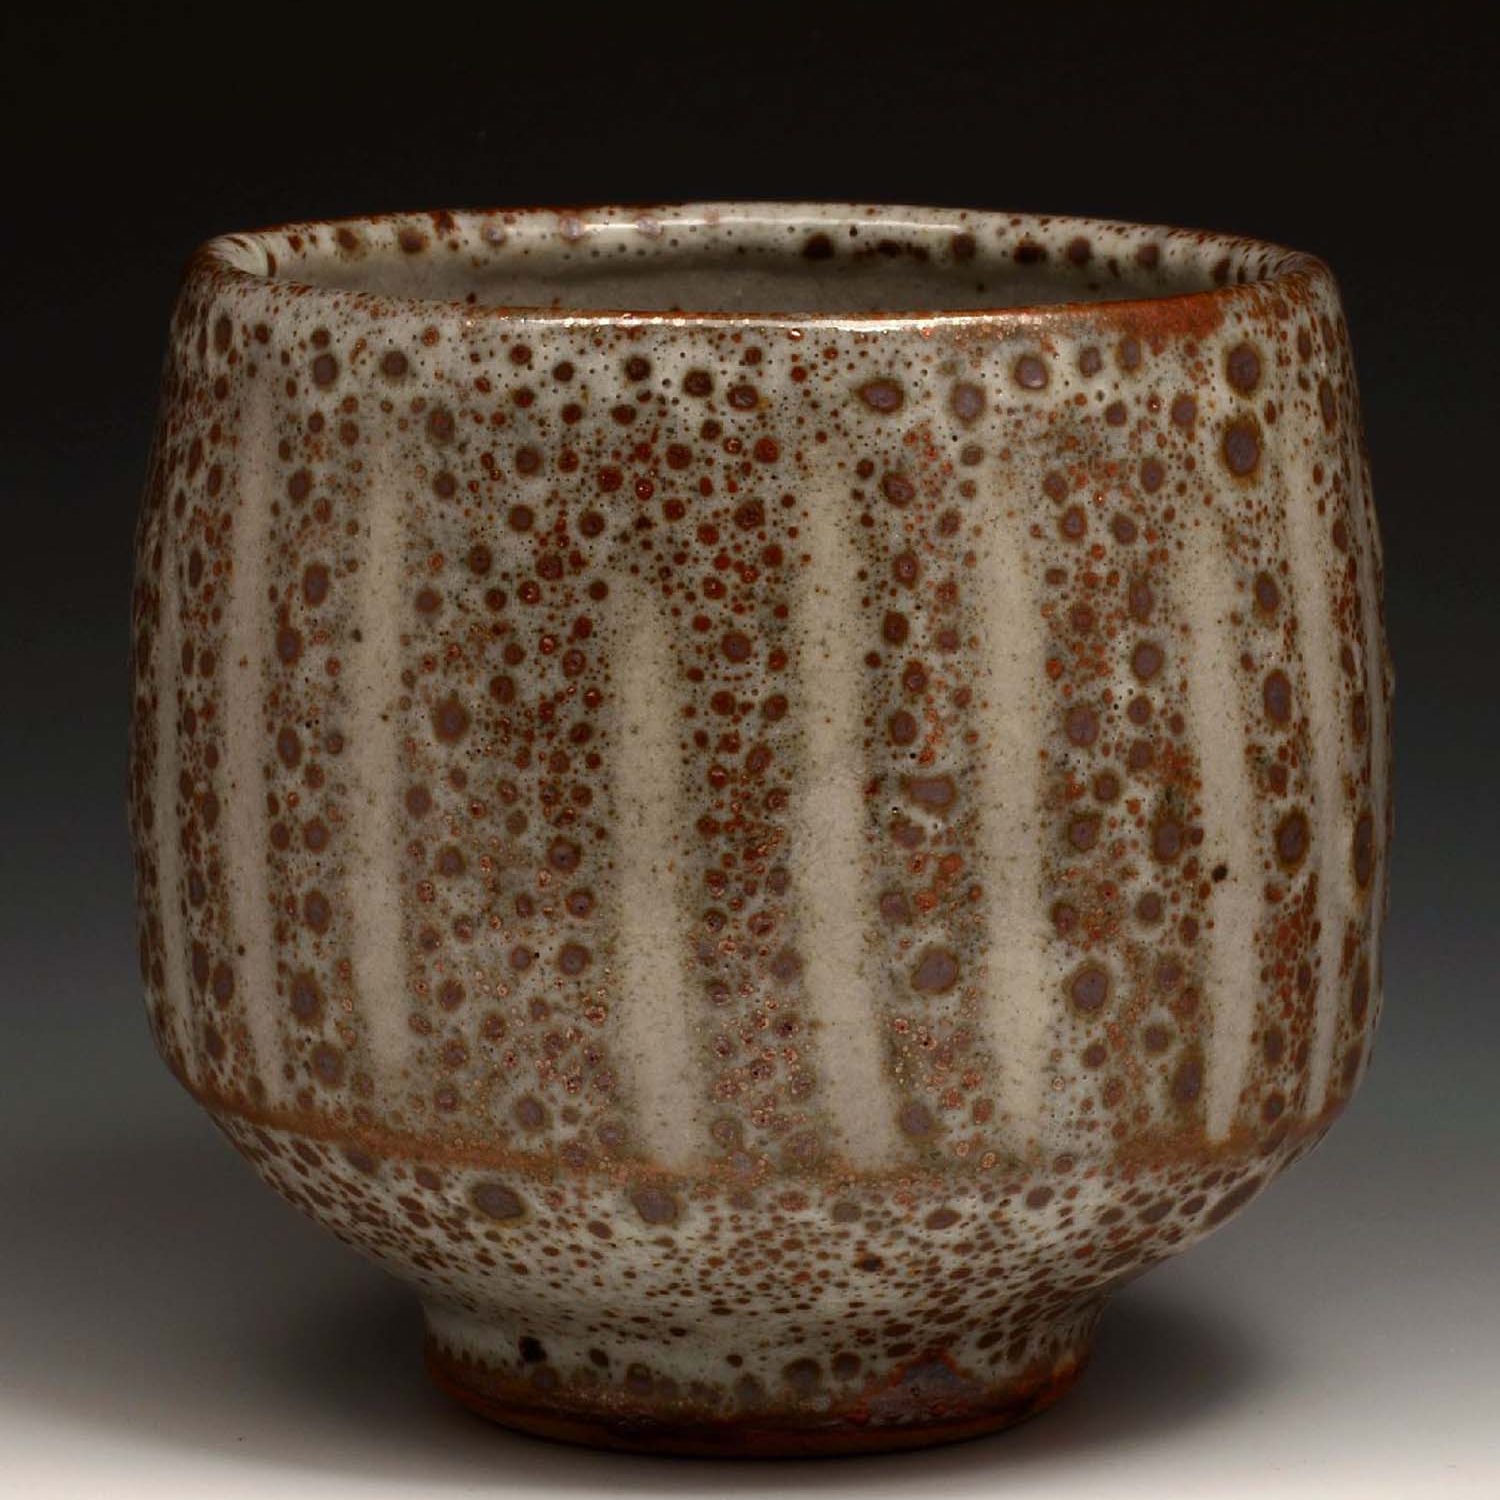 [3]
Rick Hintze, Yunomi, 2020, stoneware, local clay slip, and wood ash glaze, 3.75x4x4 inches, collection of the artist